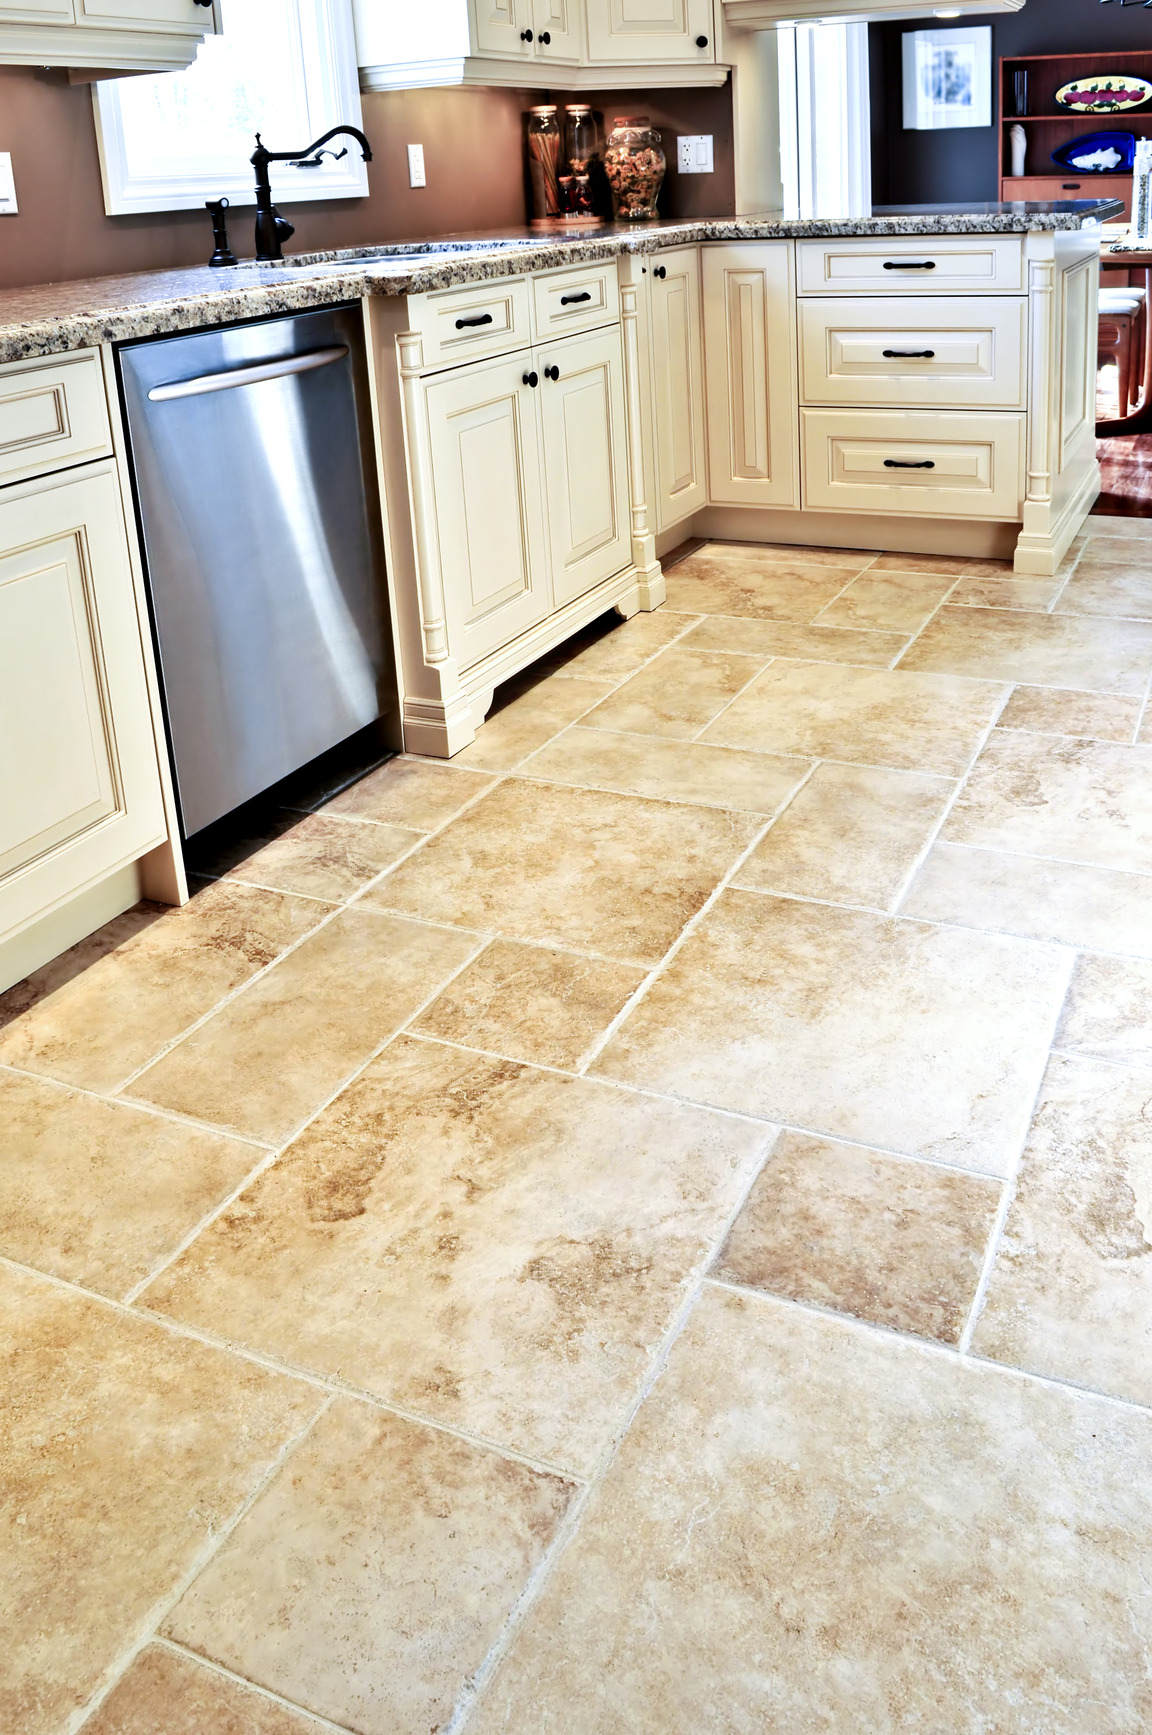 kitchen floor tile ideas with white cabinets photo - 8